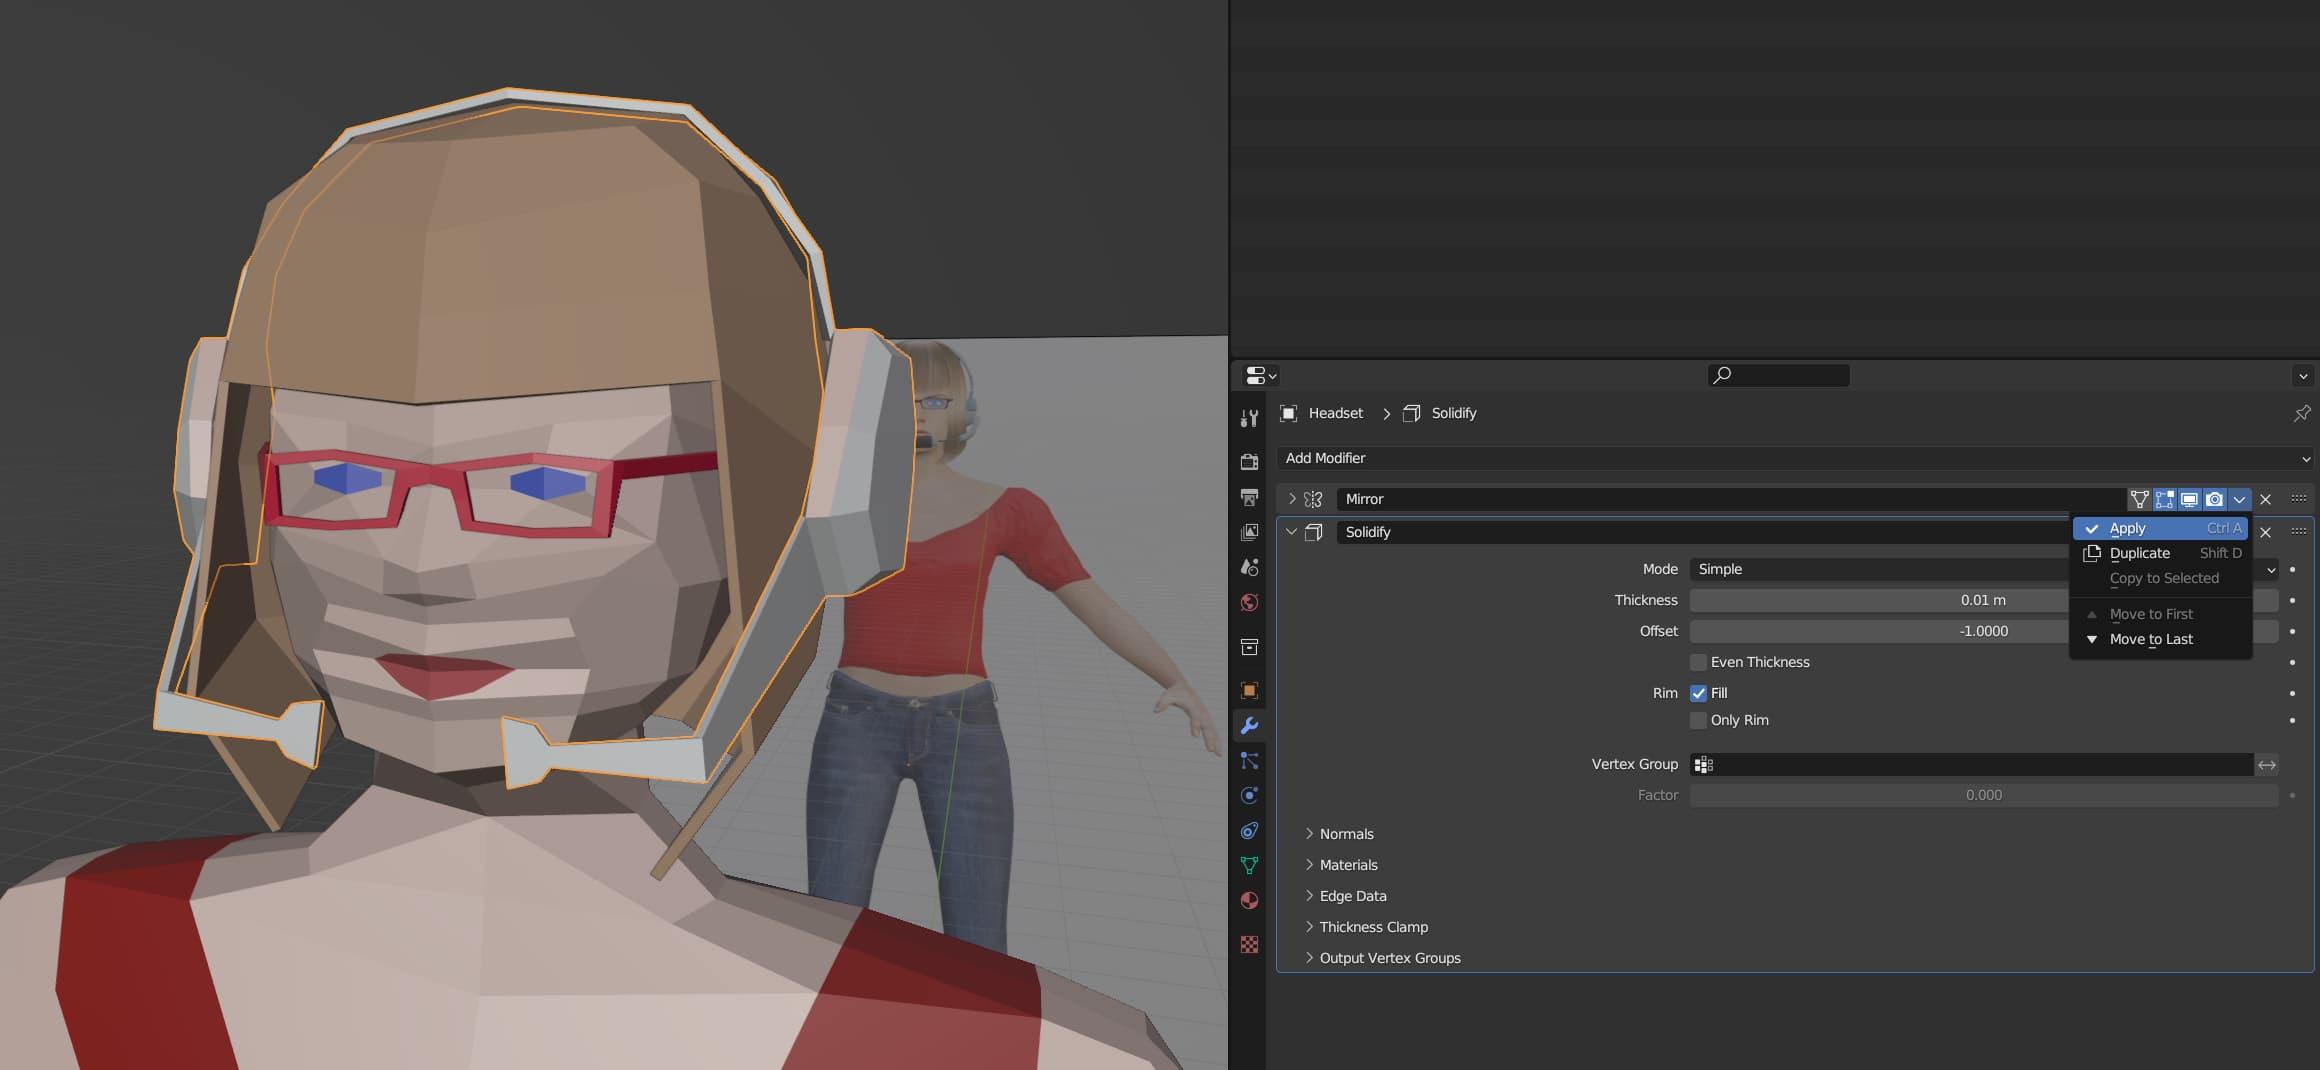 The model's head now has a headset on it, with two ear cups and two microphones. On the right side of the screen, the Apply option on the Mirror Modifier's menu is highlighted